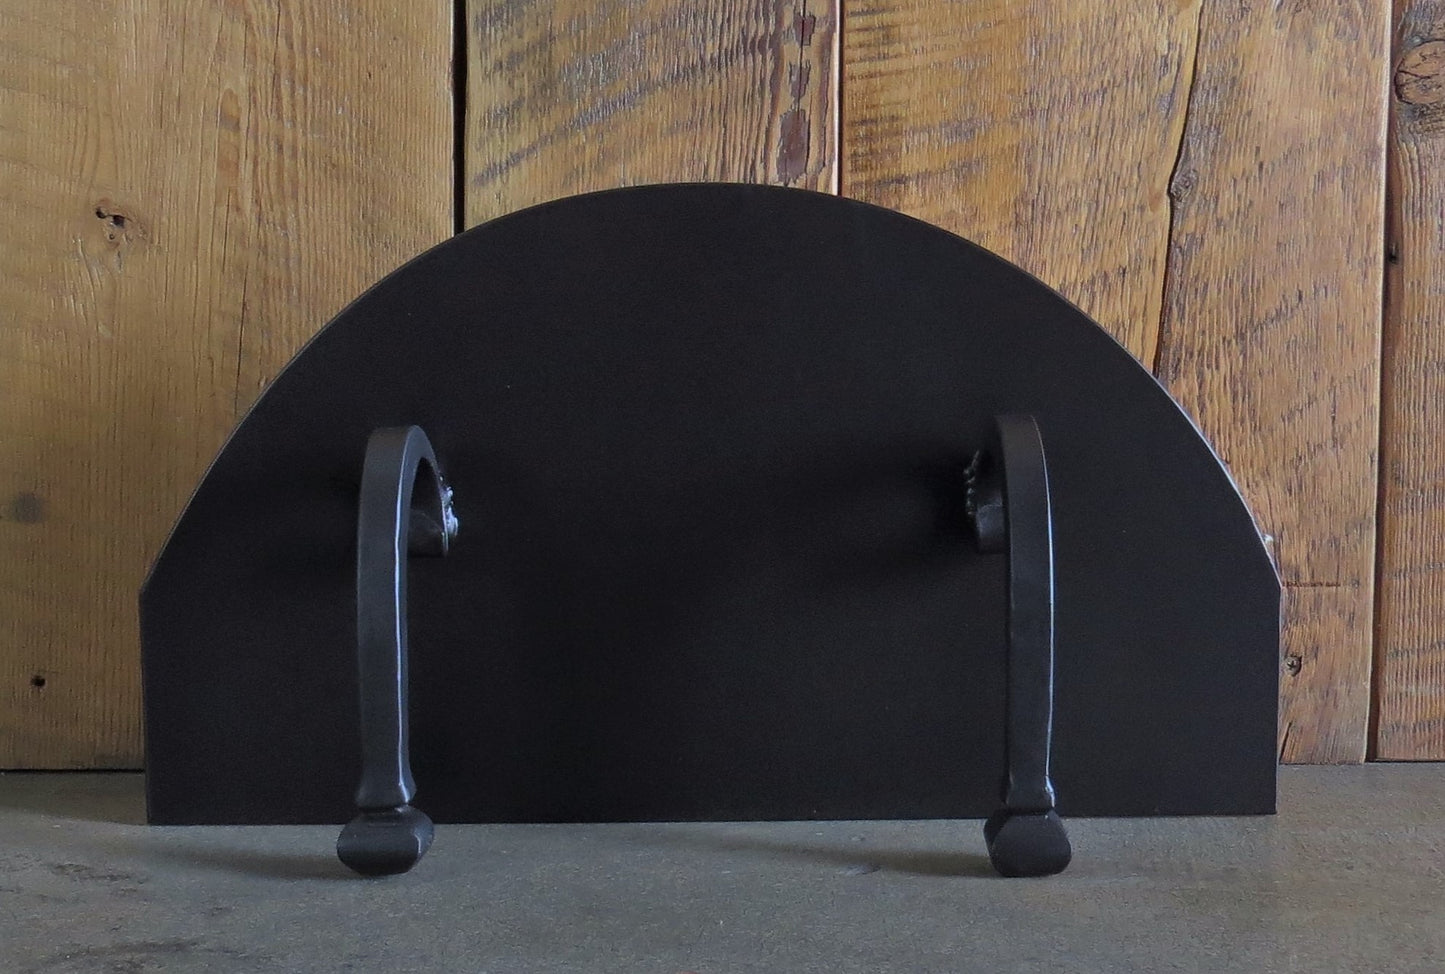 Custom Victorian Arched Freestanding Pizza Oven Door simple with decorative scrolled handles